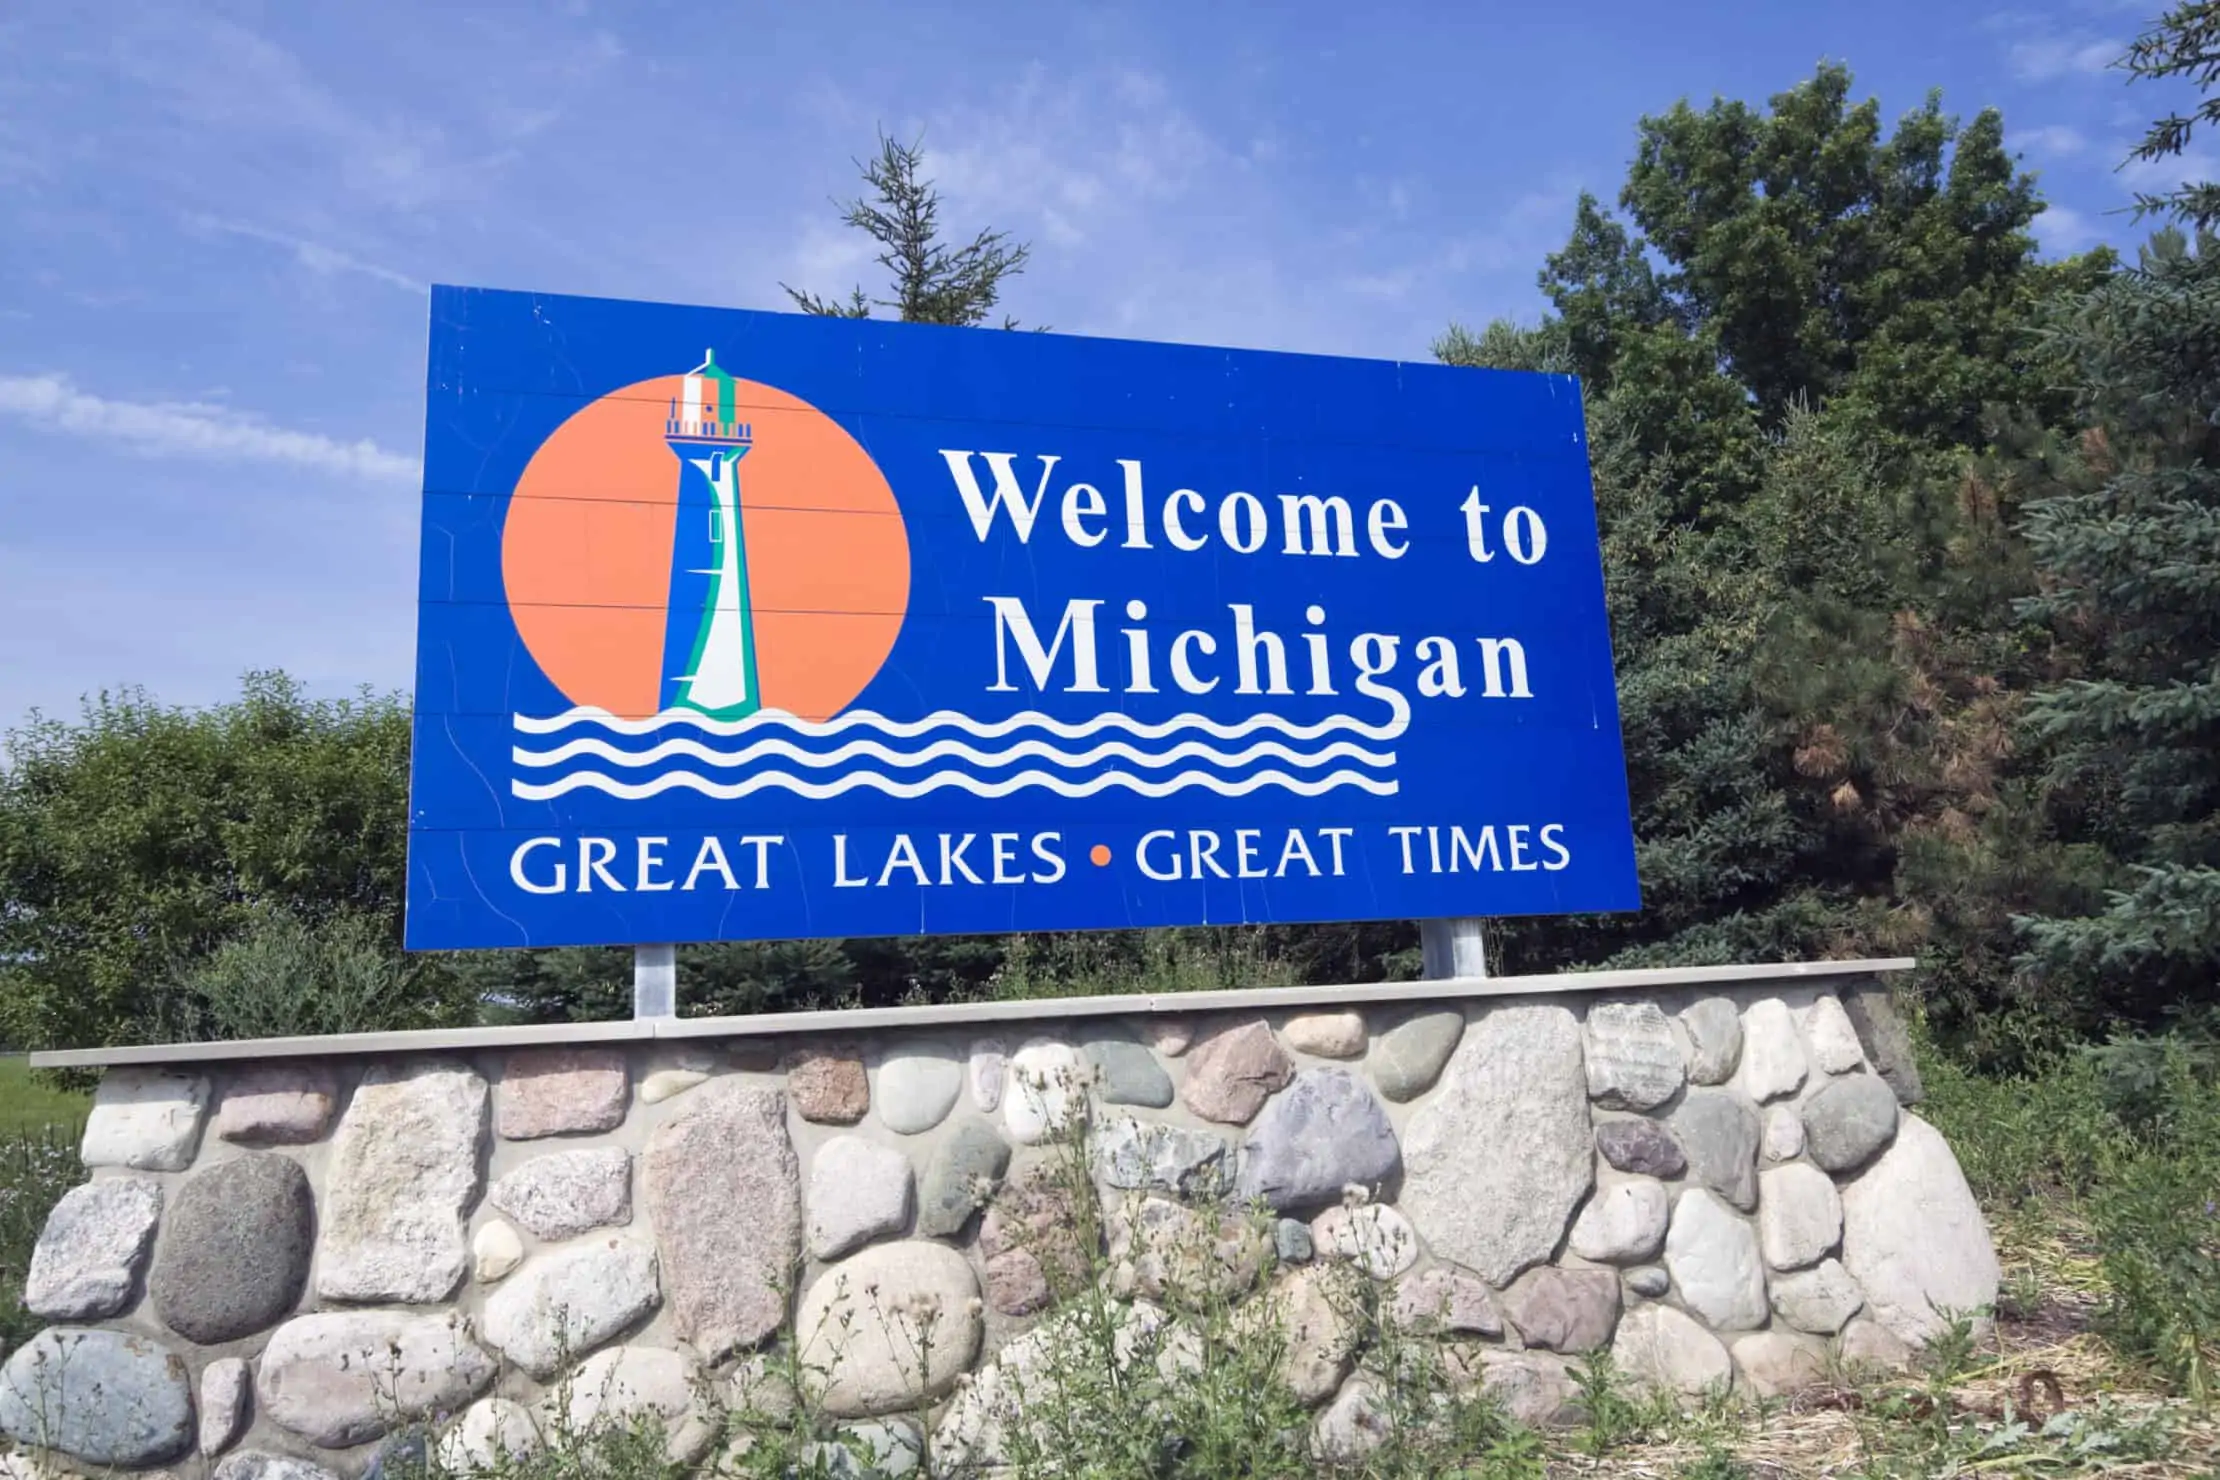 How to Apply for a Medical Cannabis Card in Michigan